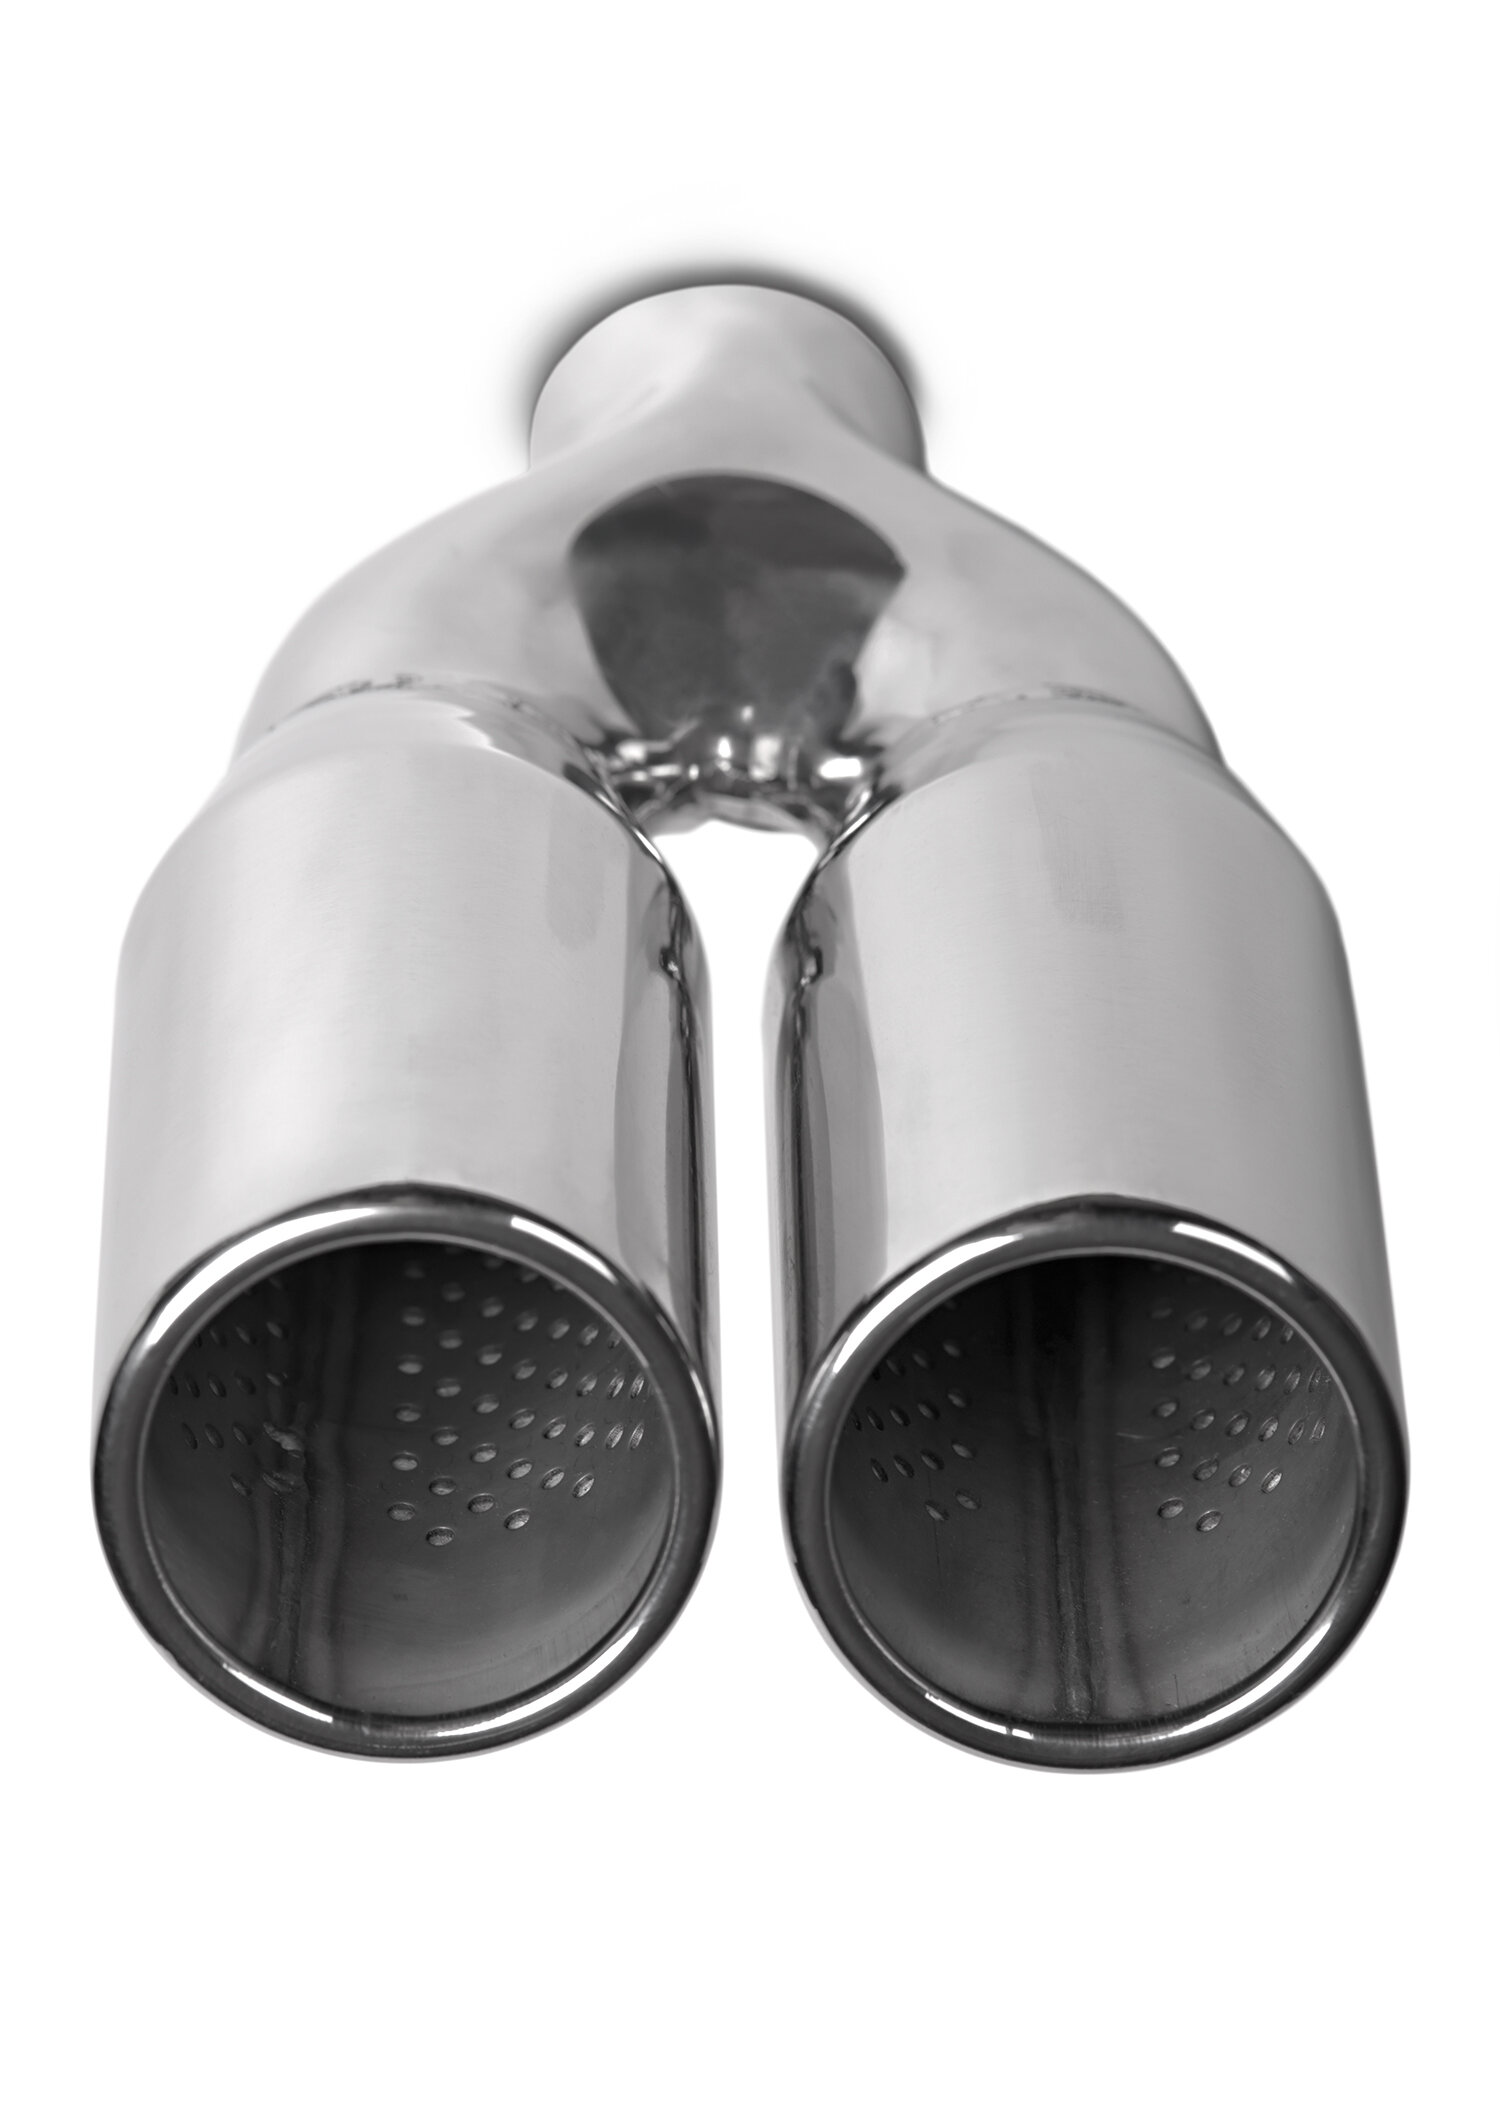 bigstock-Sports-exhaust-pipe-for-the-ca-24473255 web.jpg